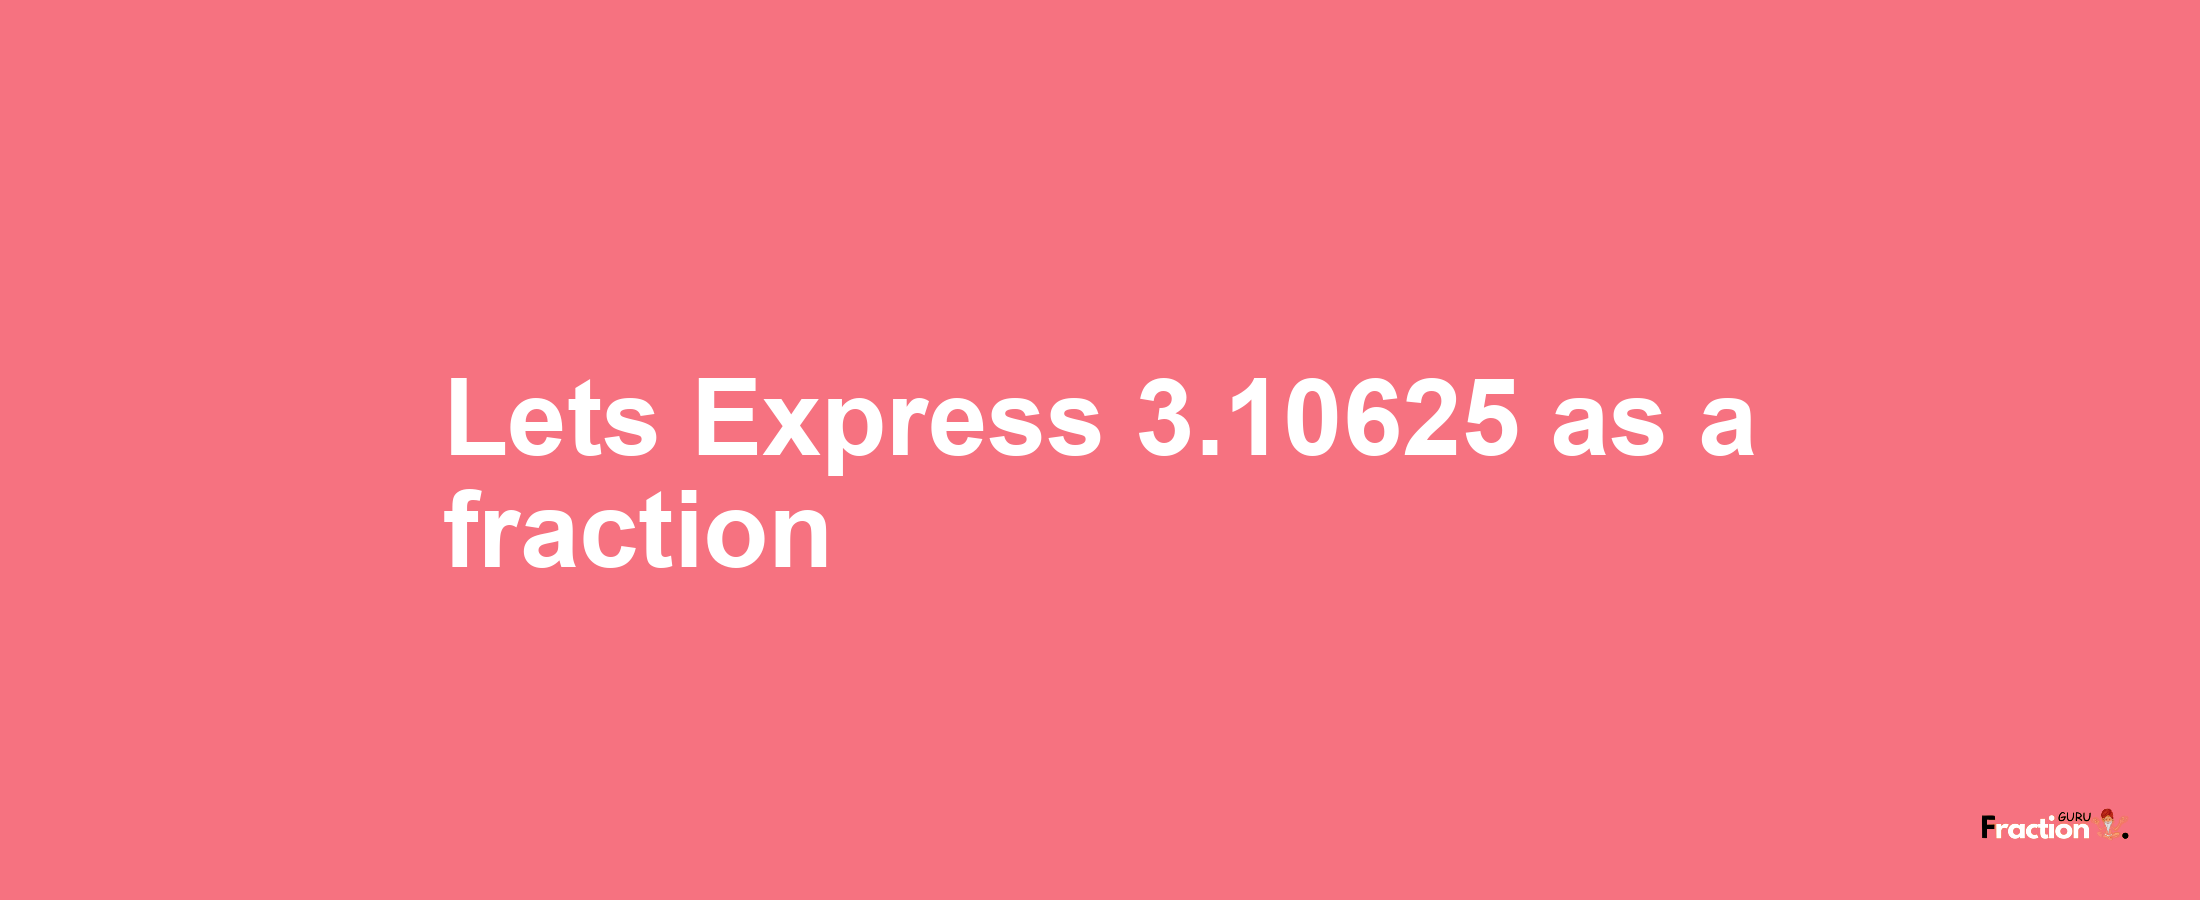 Lets Express 3.10625 as afraction